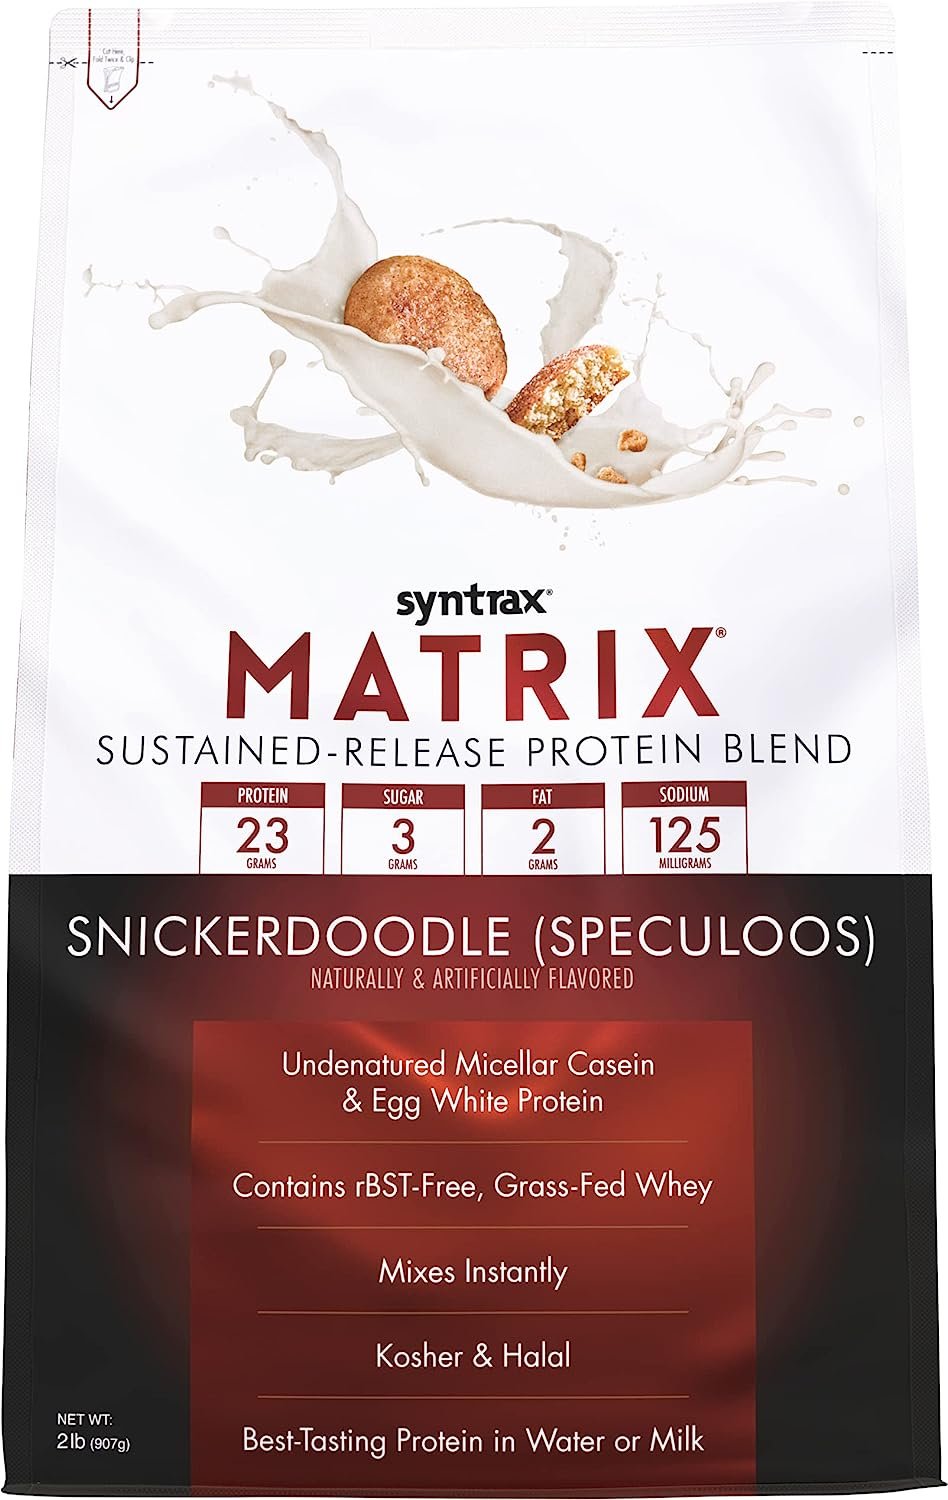 Syntrax Matrix - Sustained-Release Protein Blend Powder - Snickerdoodle (Speculoos) - Muscle Support - 2lb (Packaging may vary)